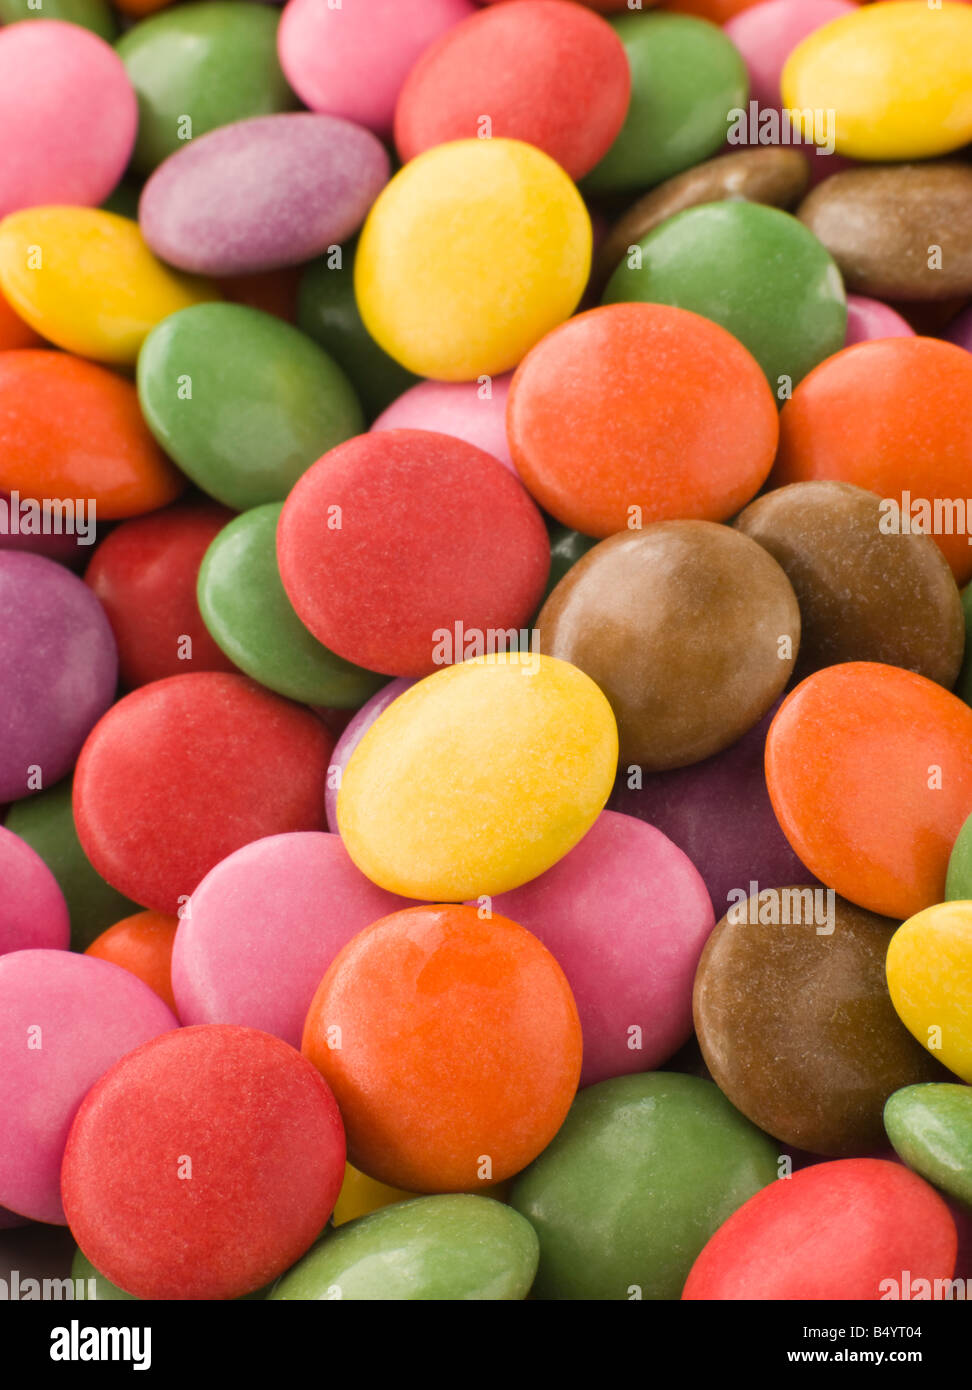 Sugar Coated Chocolate Buttons (Smarties) Stock Photo